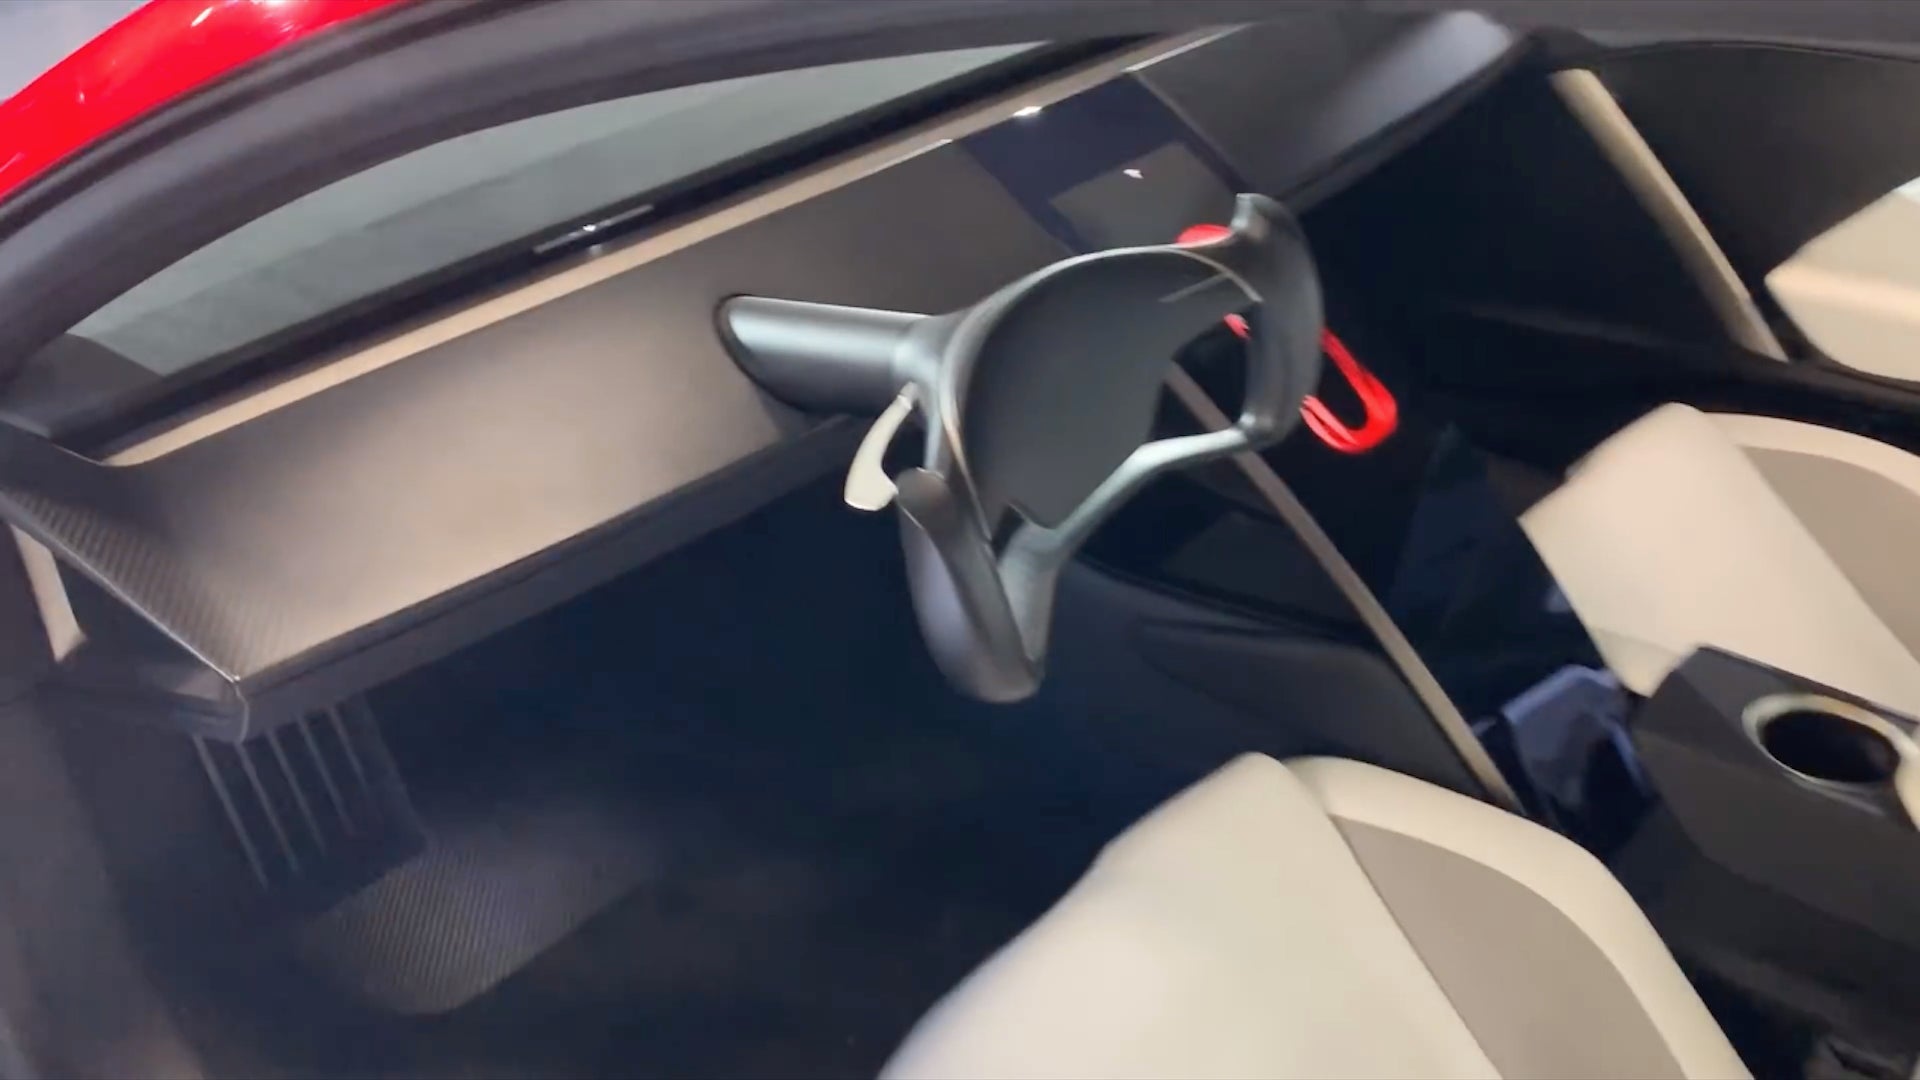 take a peek inside the up ing tesla roadster hyper ev with this spy video